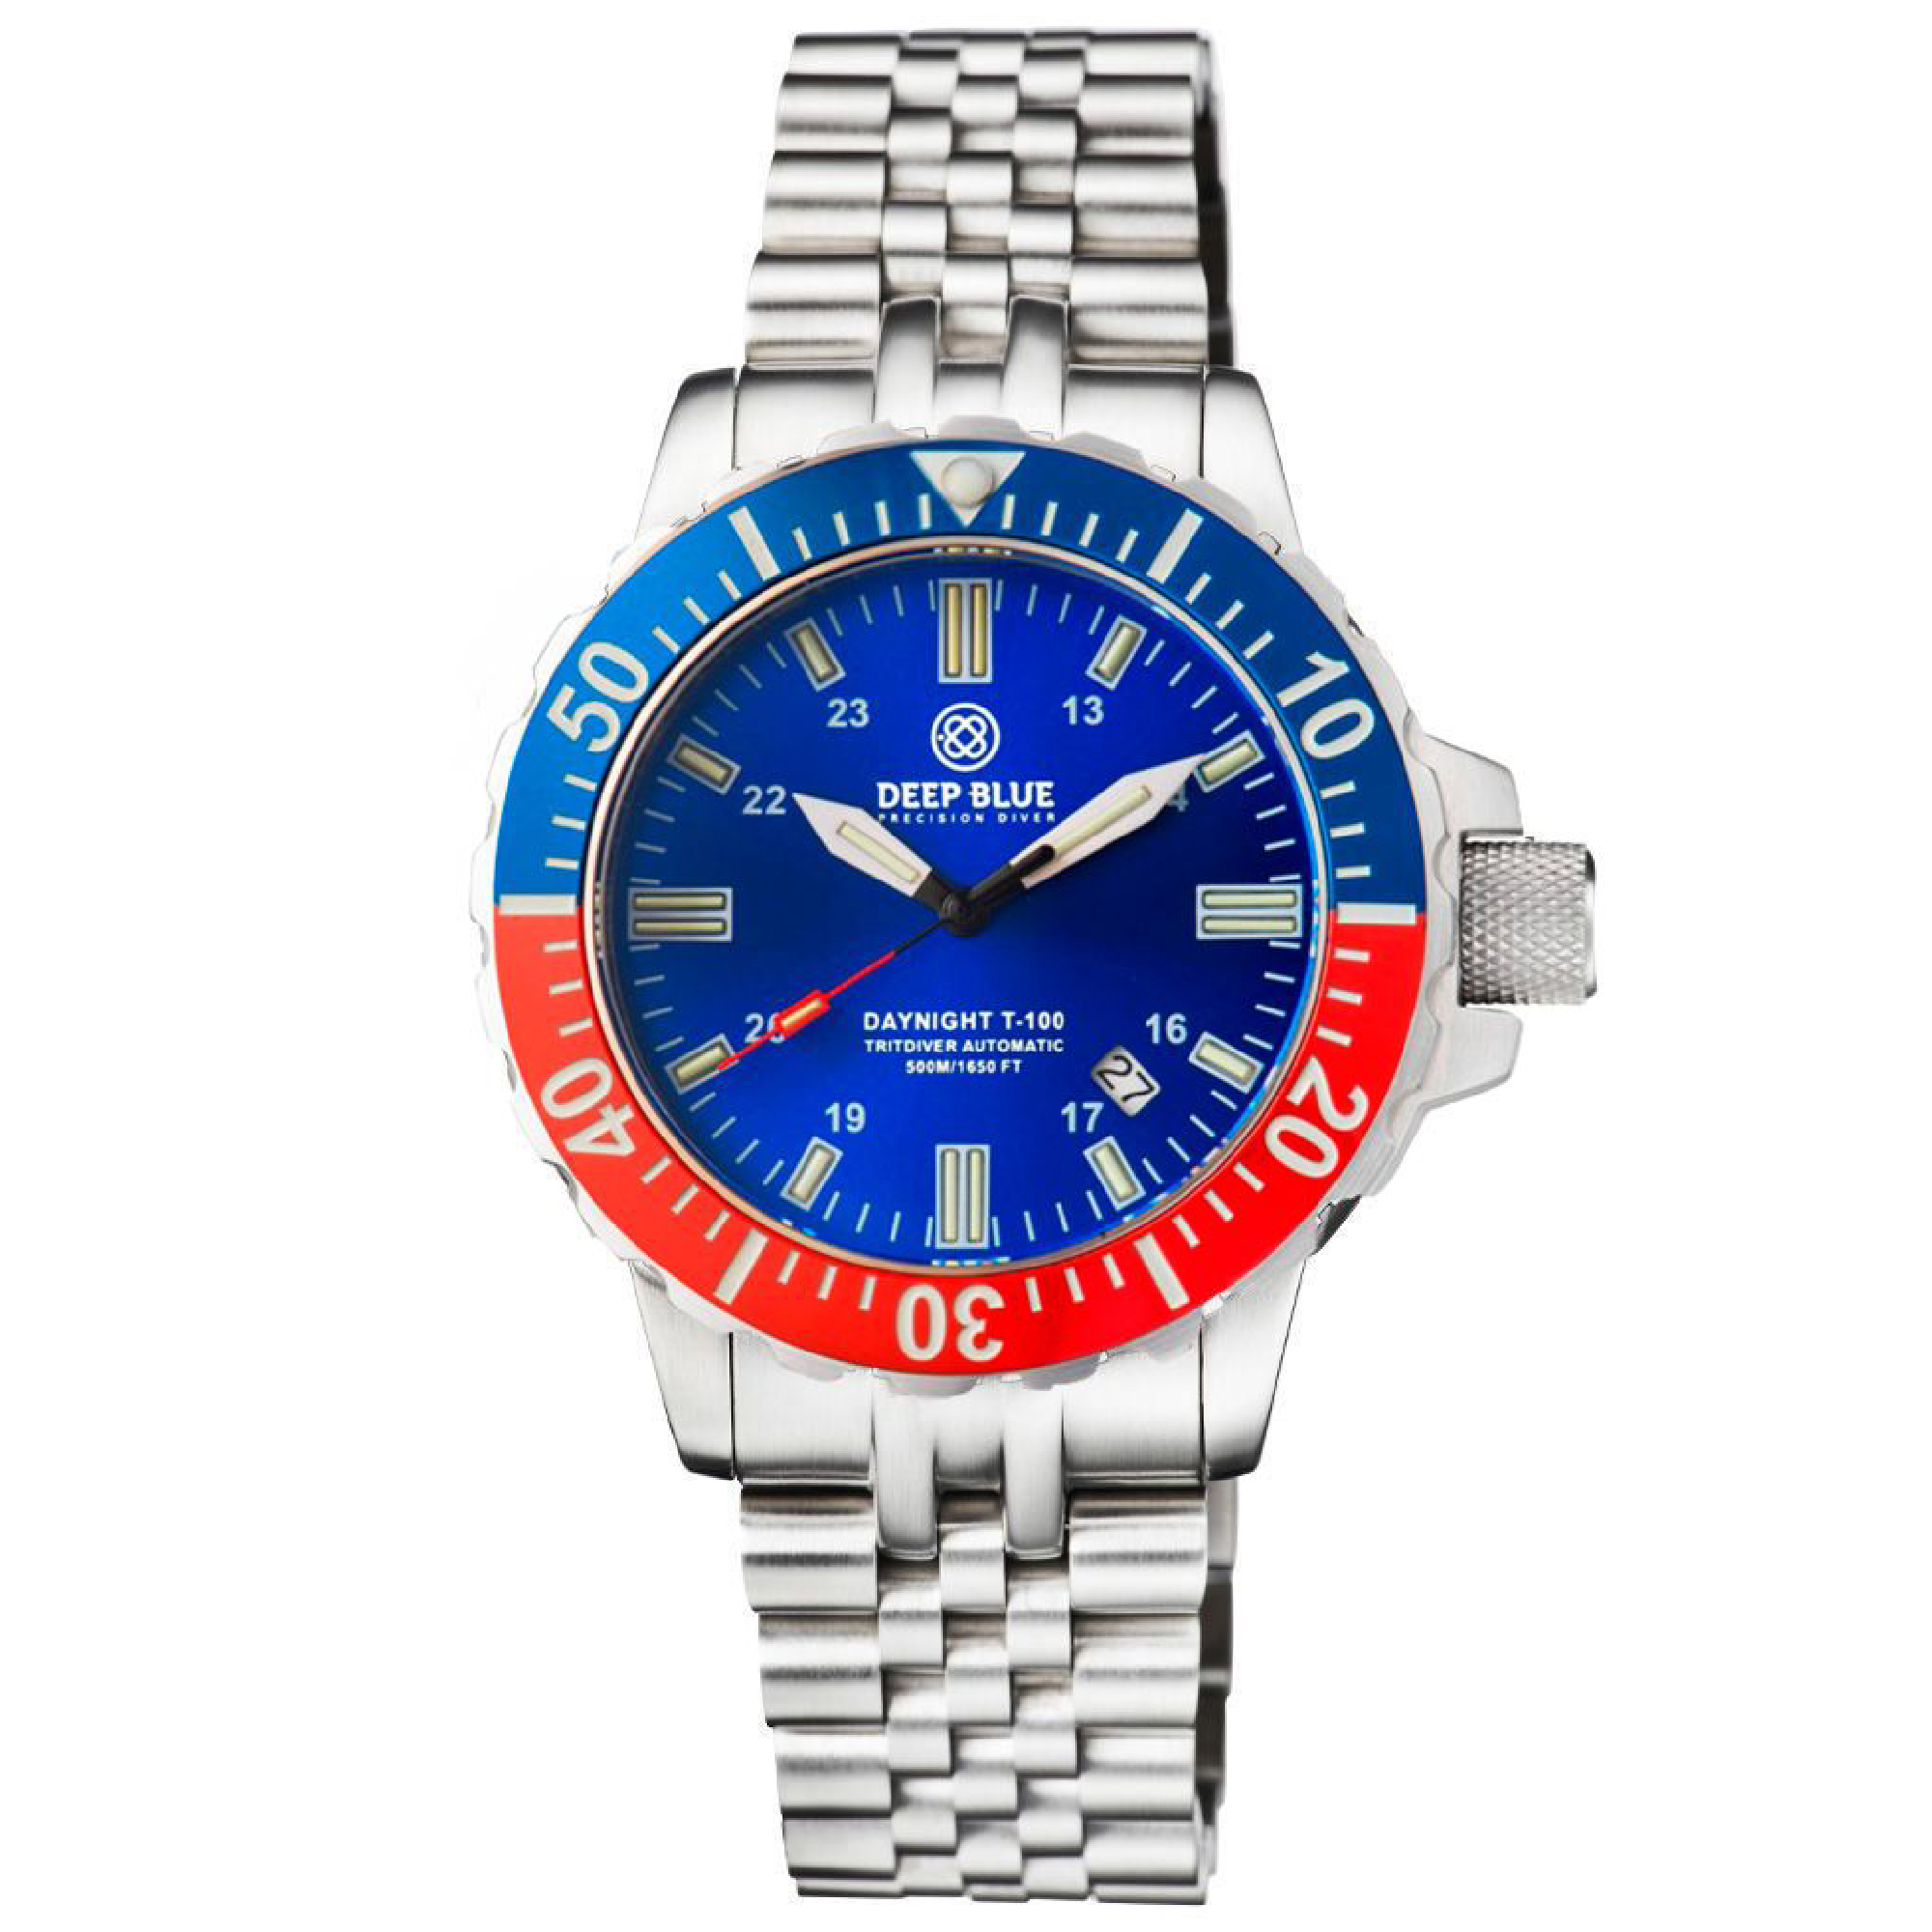 Deep Blue DayNight 41 Tritdiver T-100 Automatic Men's Diver Watch Blue-Red Bezel/Blue Dial